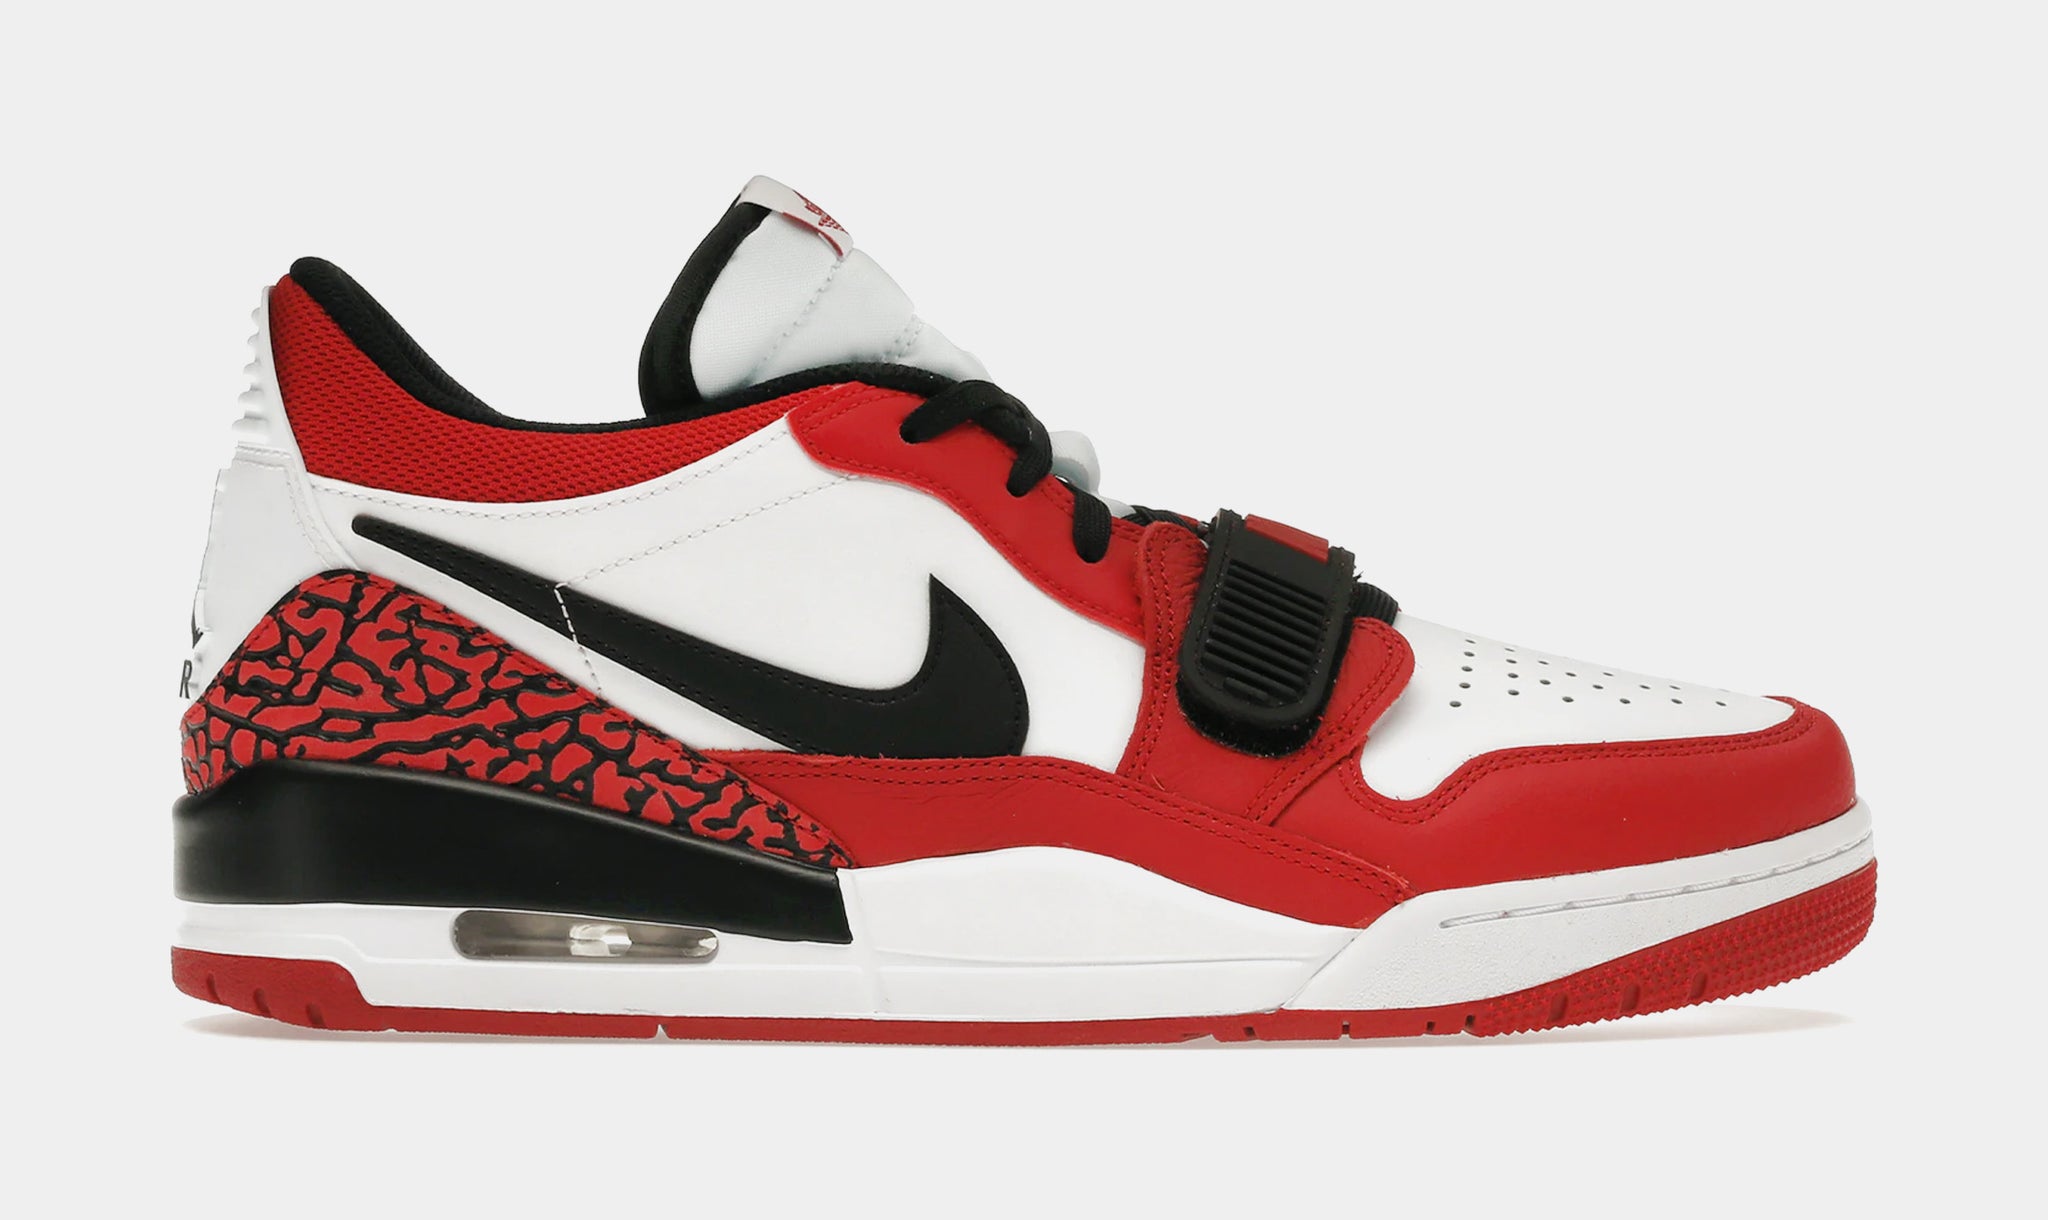 Jordan Legacy 312 Low Chicago Mens Basketball Shoes Red White